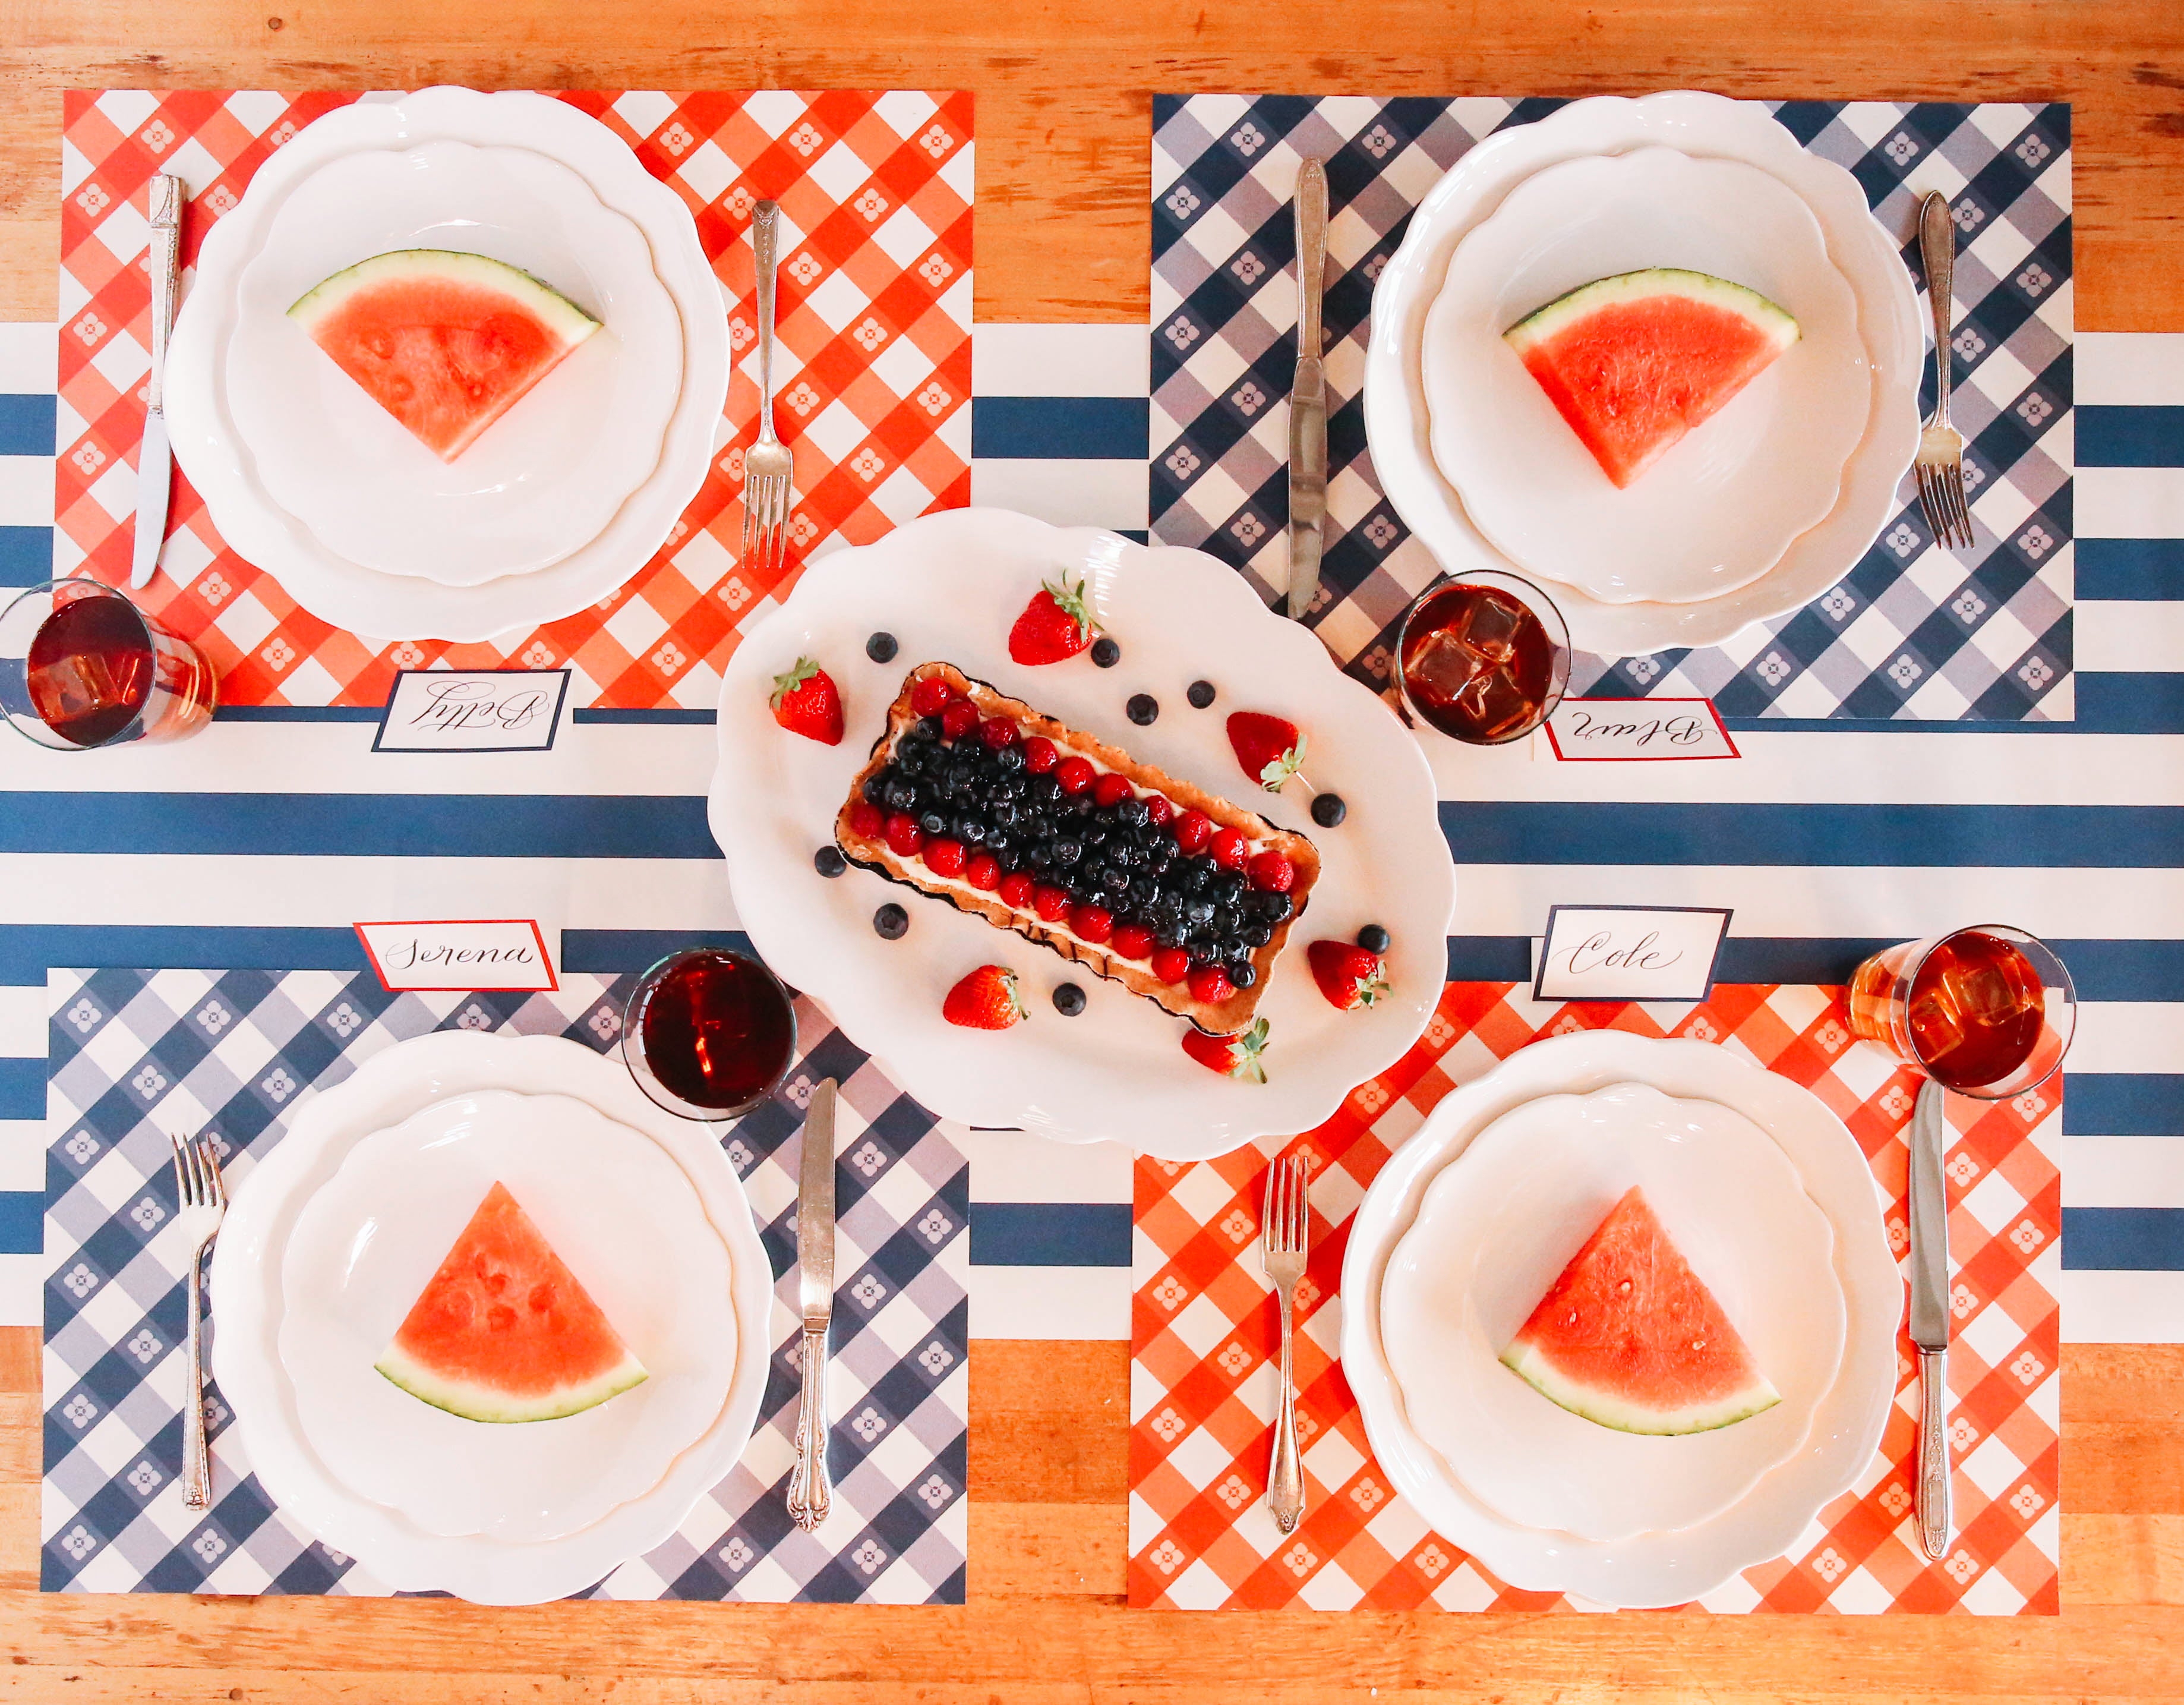 The red and blue Picnic Check Placemats under a picnic-themed table setting for four, from above.